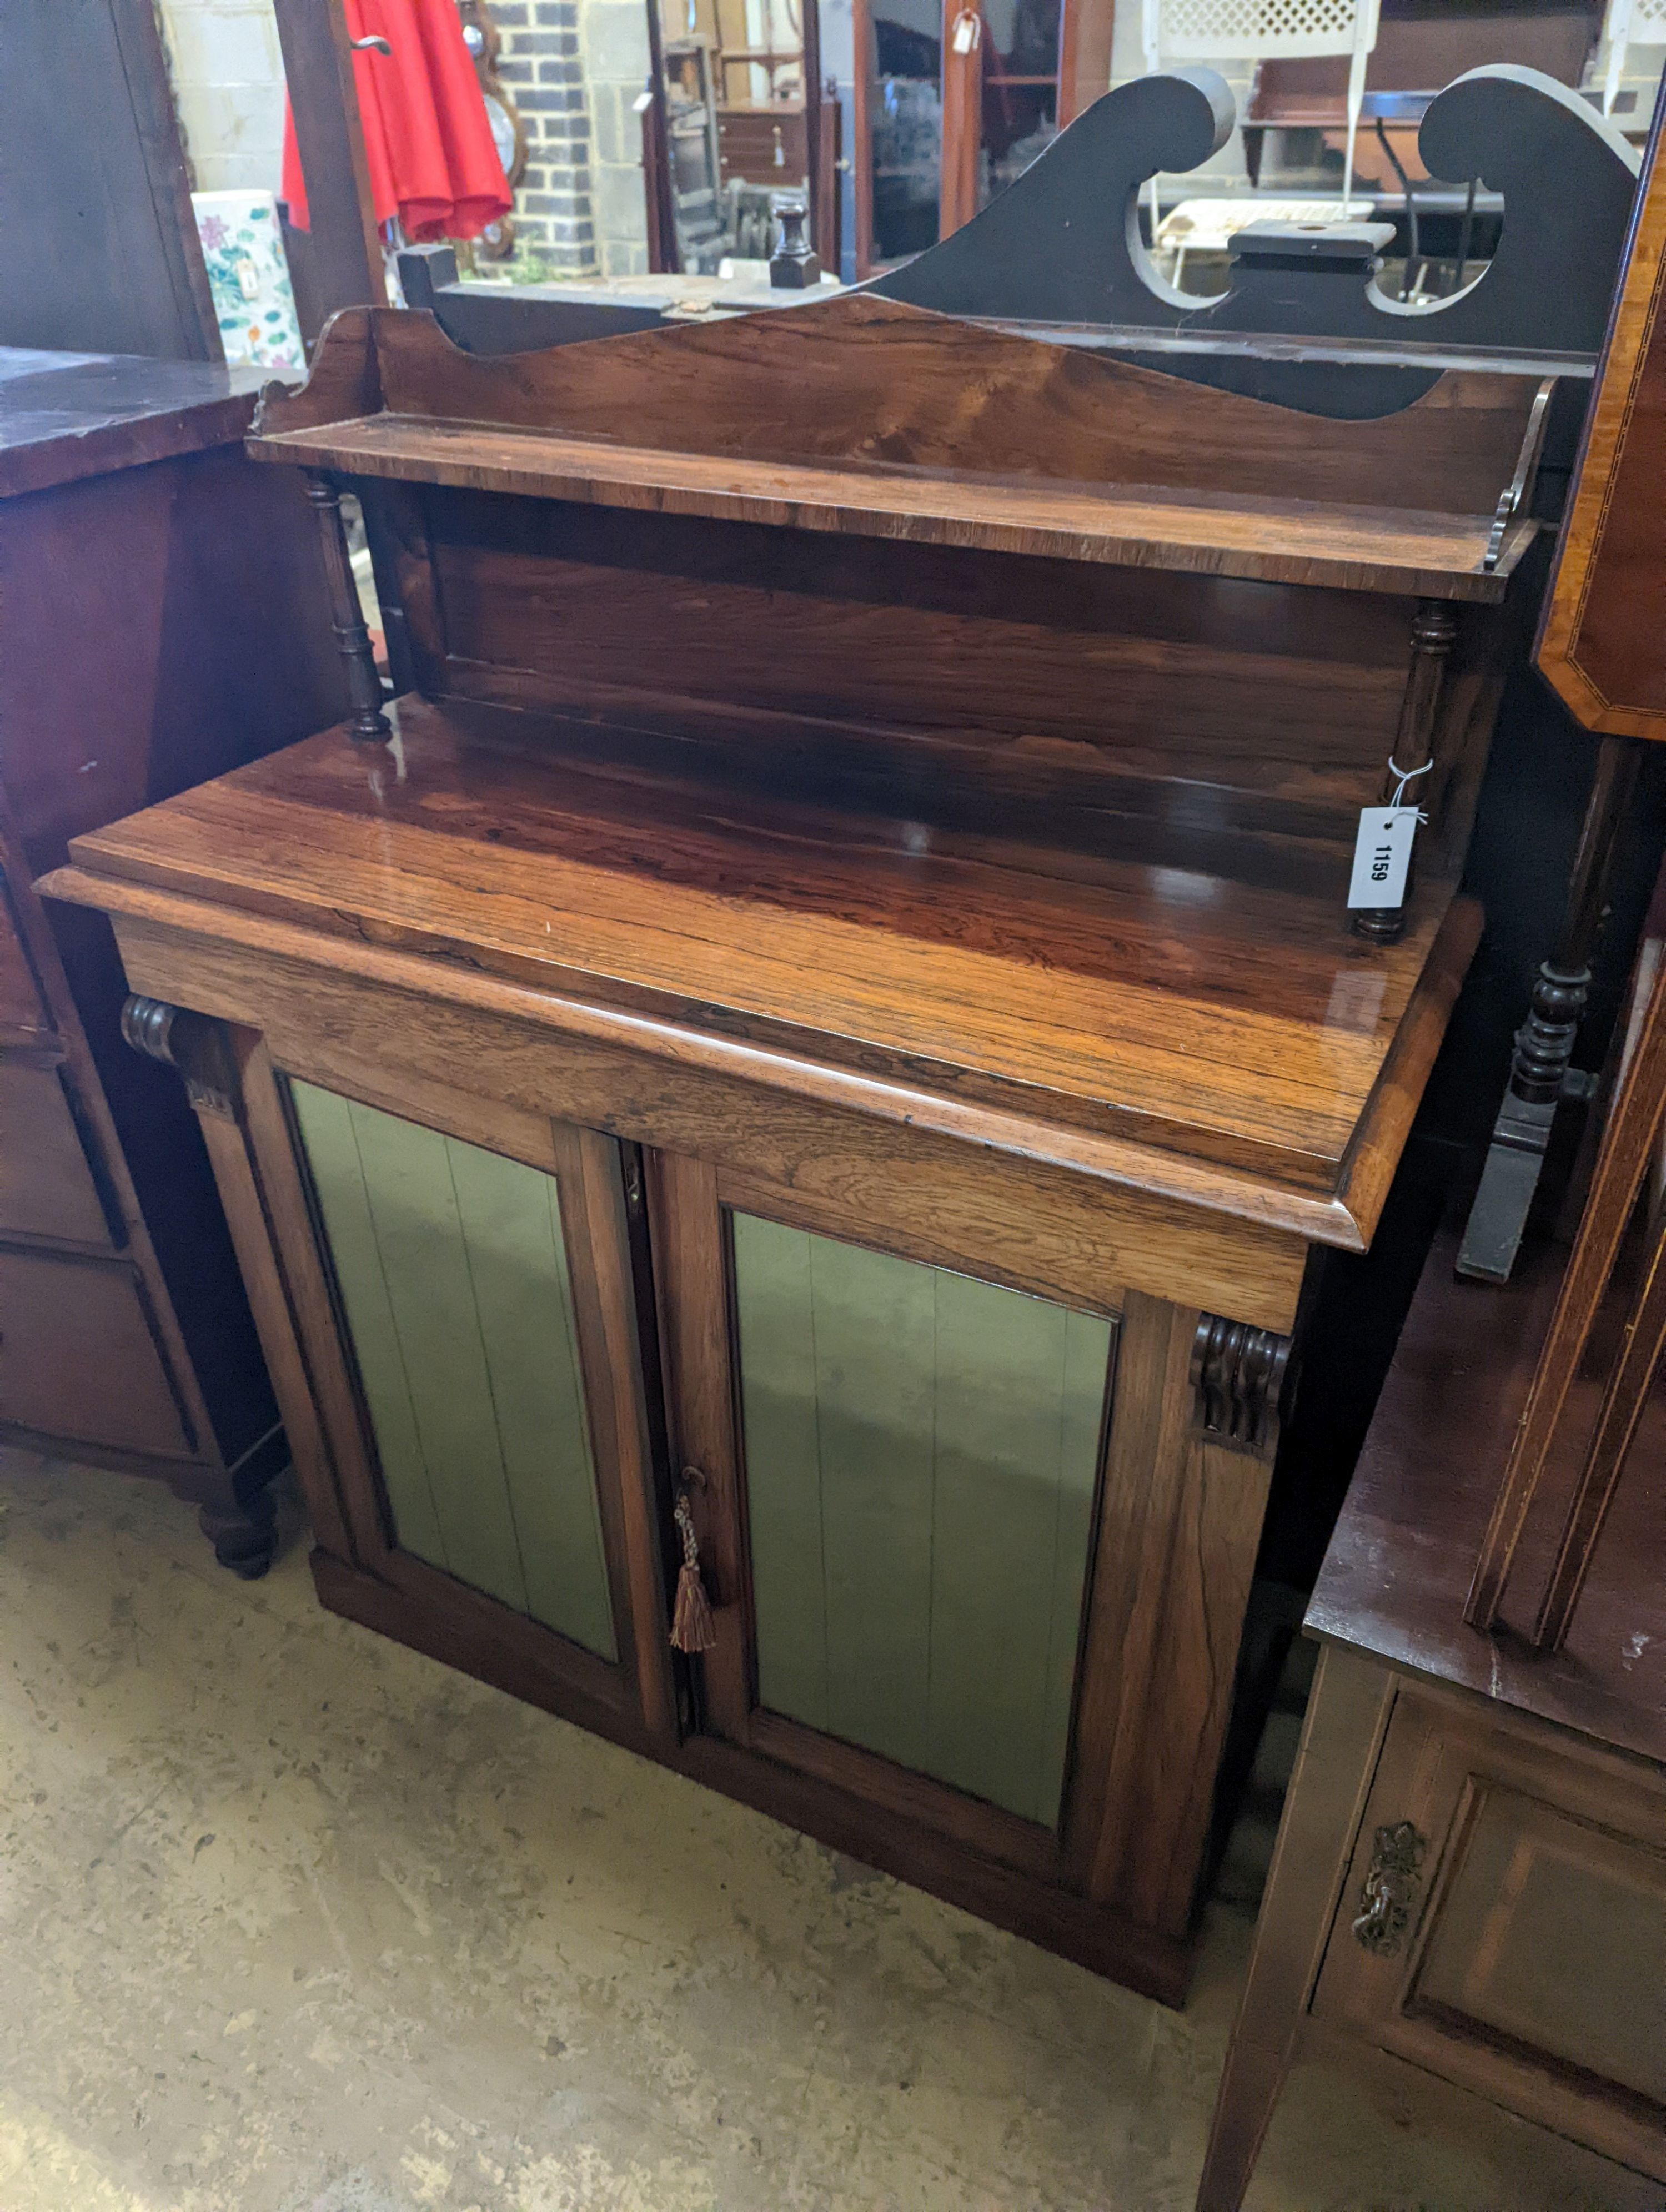 An early Victorian rosewood chiffonier, width 101cm, depth 45cm, height 127cm